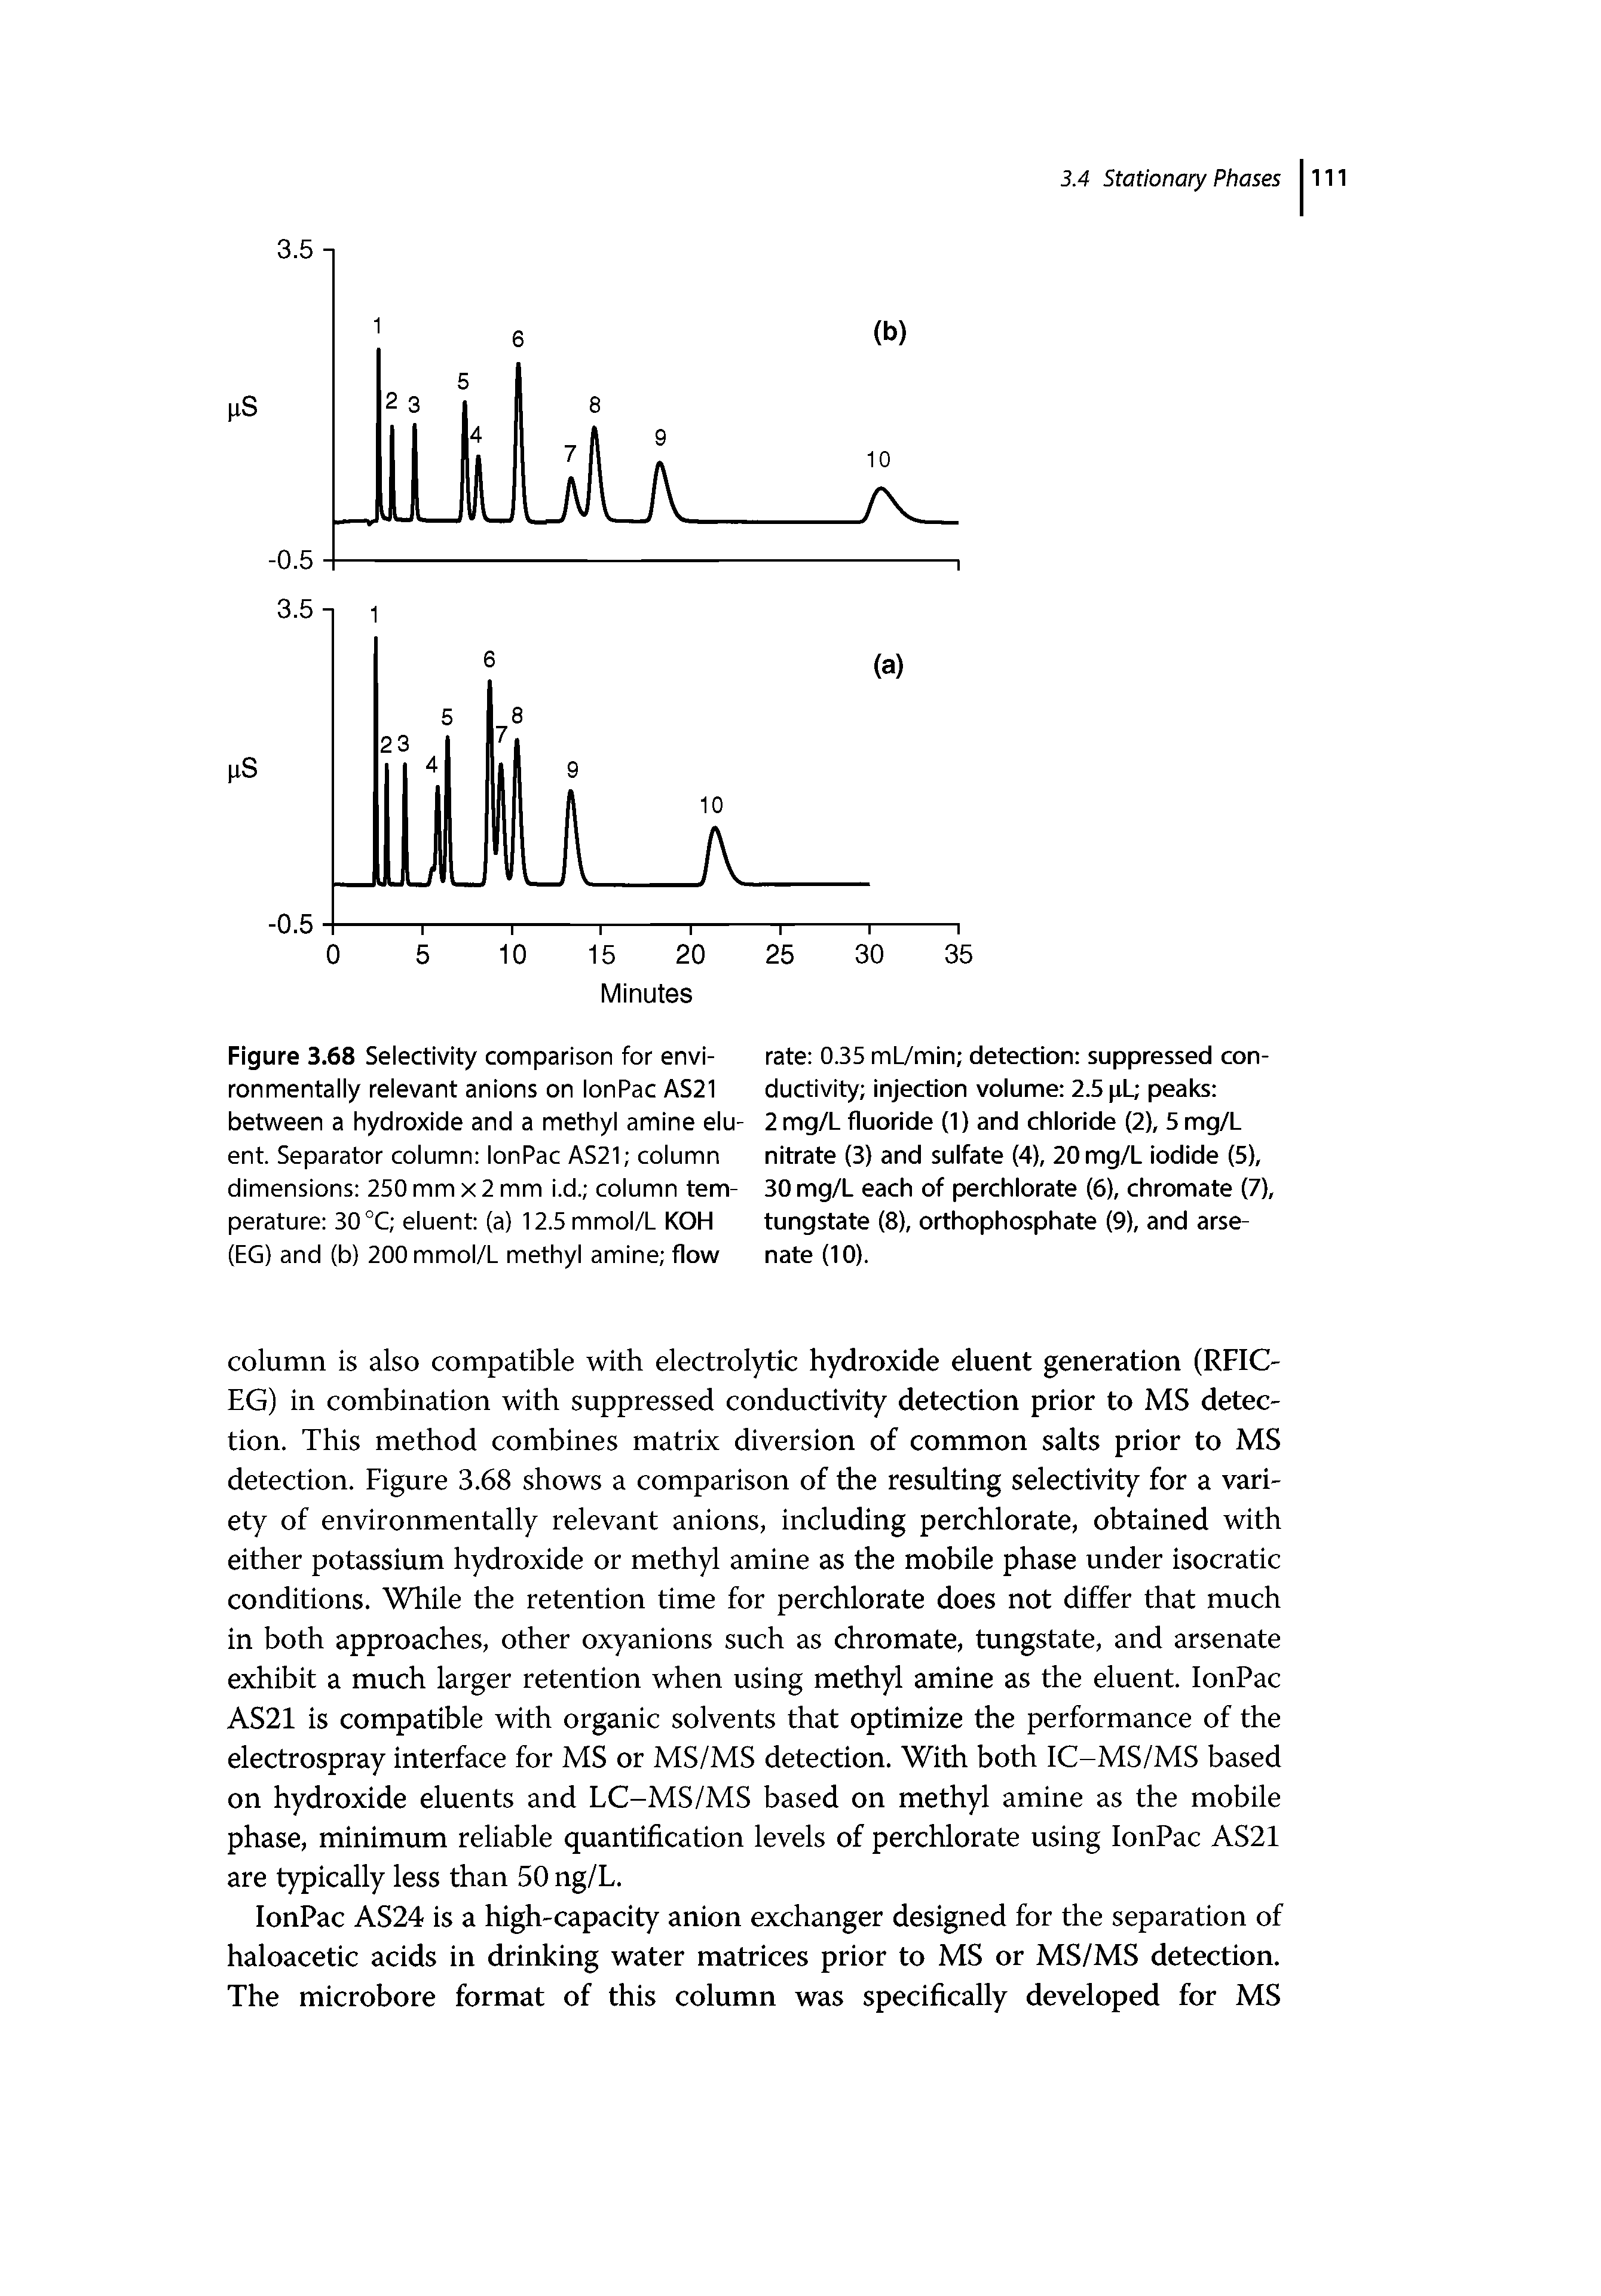 Figure 3.68 Selectivity comparison for environmentally relevant anions on lonPac AS21 between a hydroxide and a methyl amine eluent. Separator column lonPac AS21 column dimensions 250 mm x 2 mm i.d. column temperature 30 °C eluent (a) 12.5 mmol/L KOH (EG) and (b) 200 mmol/L methyl amine flow...